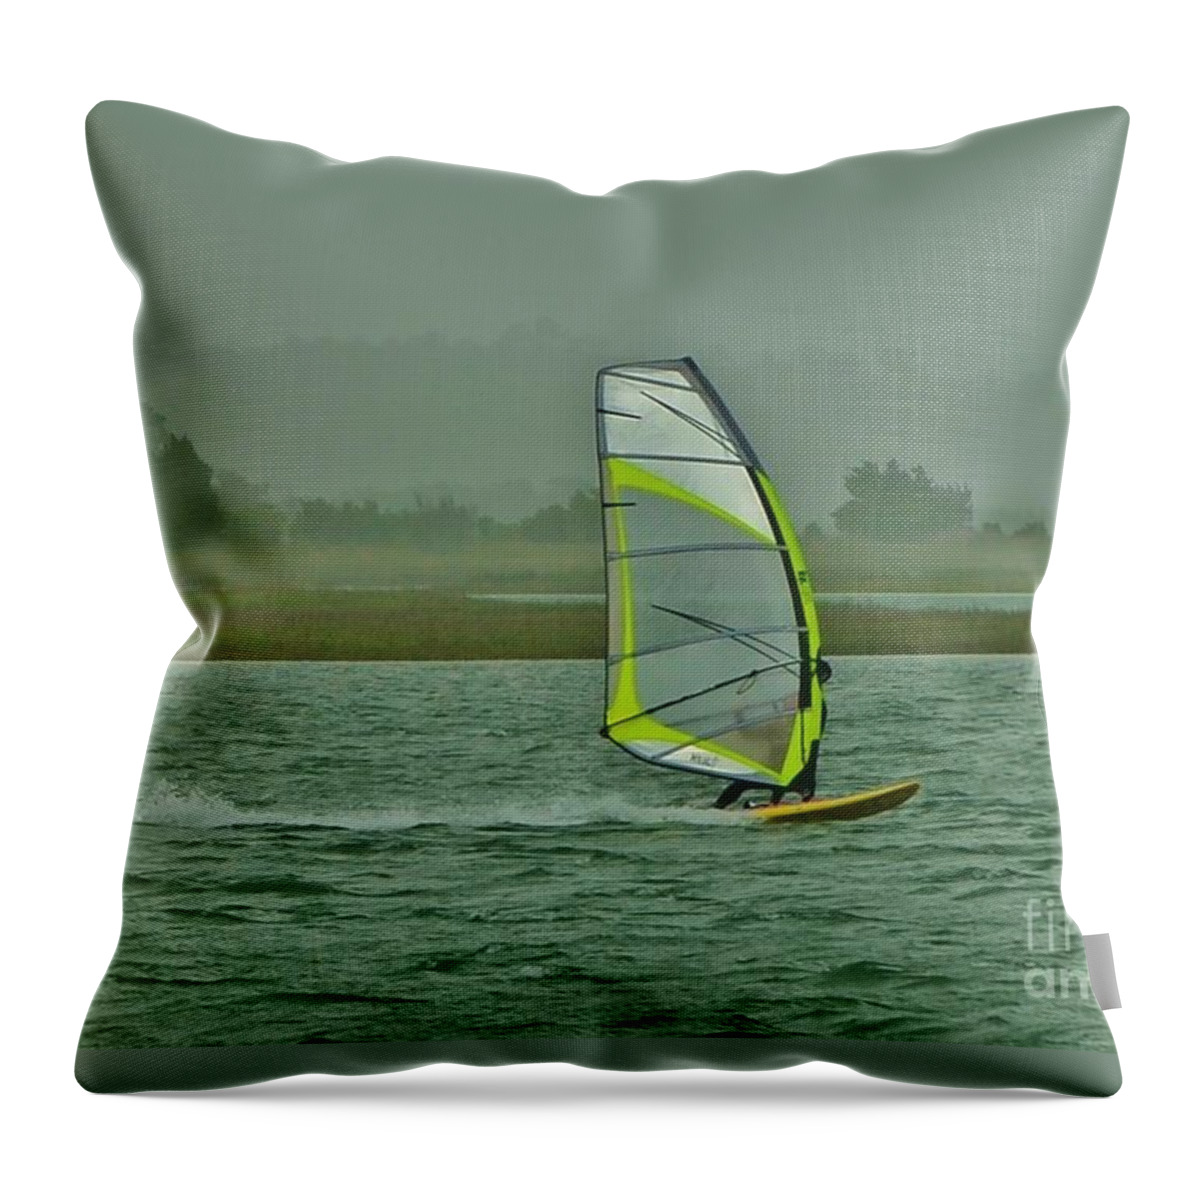 Fog Throw Pillow featuring the photograph Wind Surfing 3 by Bob Sample